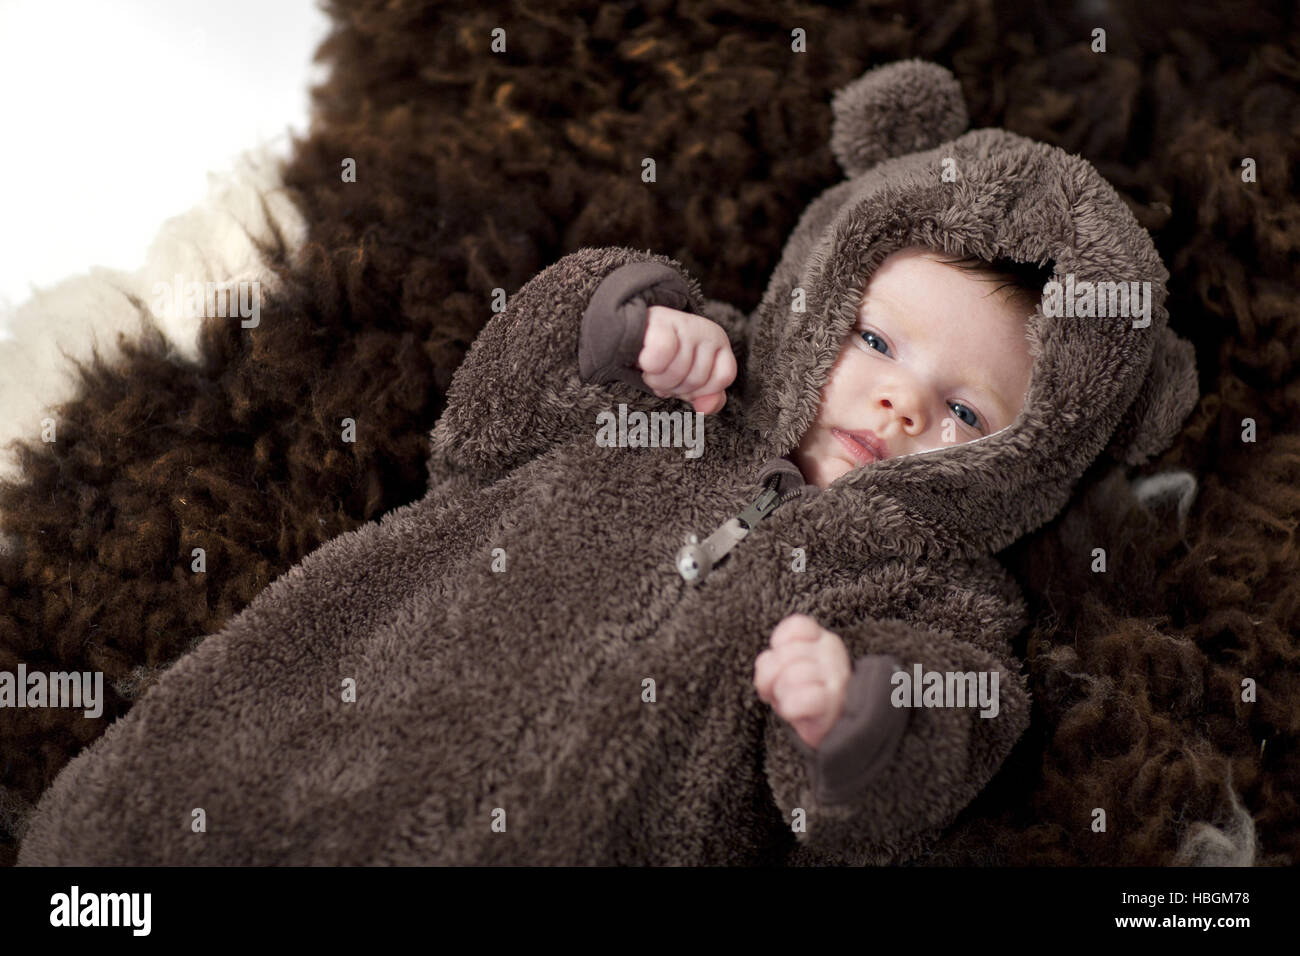 Baby in bear suit Stock Photo